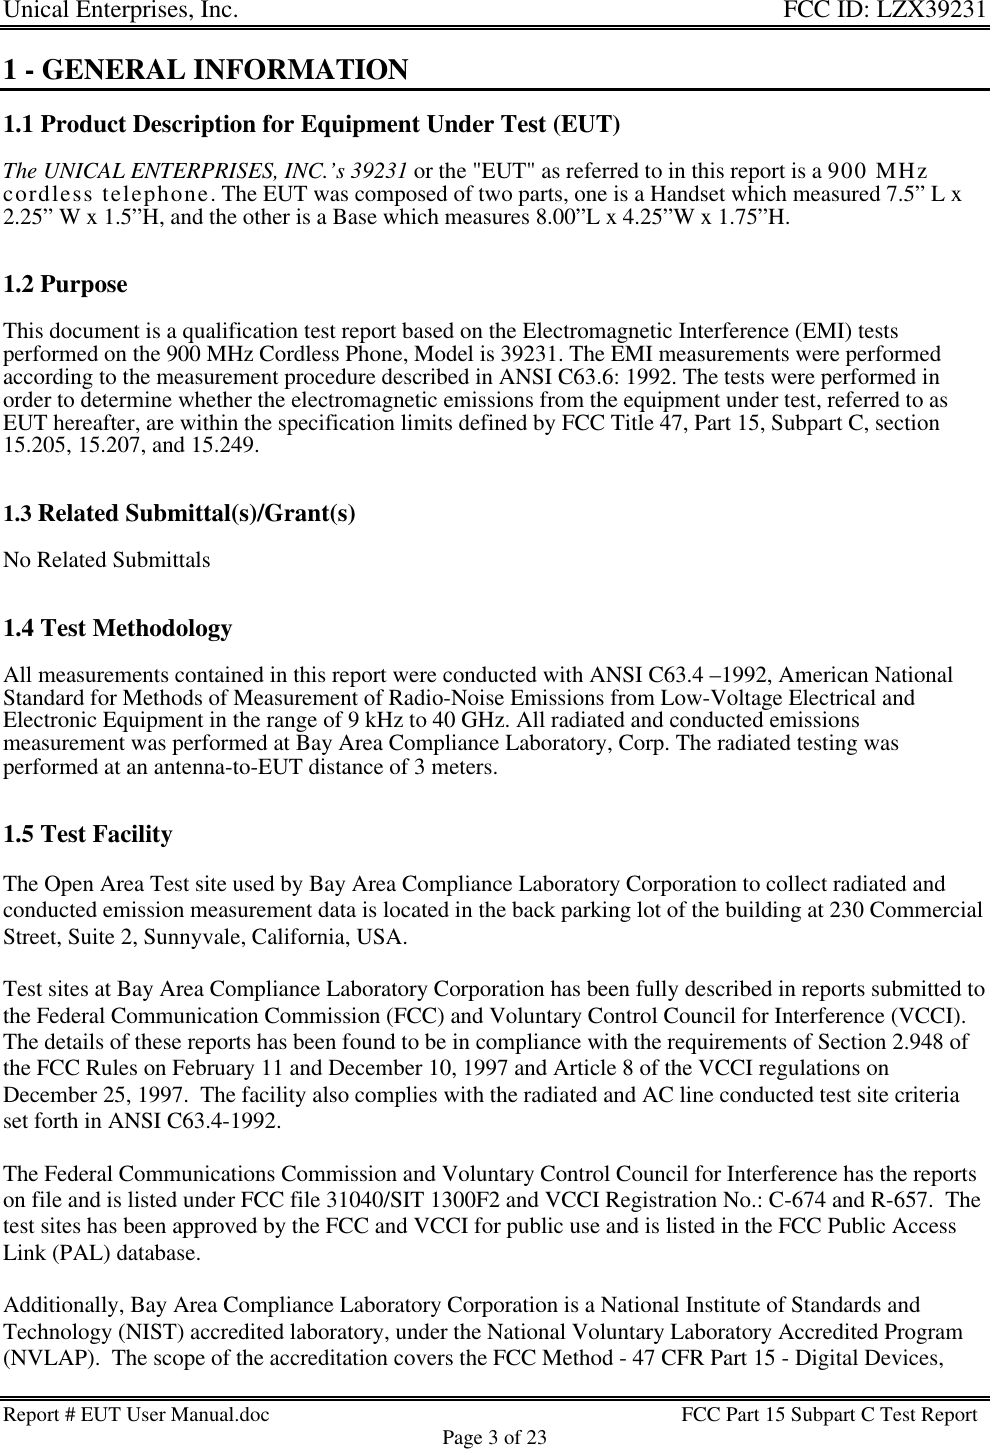 Unical Enterprises, Inc. FCC ID: LZX39231Report # EUT User Manual.doc FCC Part 15 Subpart C Test ReportPage 3 of 231 - GENERAL INFORMATION1.1 Product Description for Equipment Under Test (EUT)The UNICAL ENTERPRISES, INC.’s 39231 or the &quot;EUT&quot; as referred to in this report is a 900 MHzcordless telephone. The EUT was composed of two parts, one is a Handset which measured 7.5” L x2.25” W x 1.5”H, and the other is a Base which measures 8.00”L x 4.25”W x 1.75”H.1.2 PurposeThis document is a qualification test report based on the Electromagnetic Interference (EMI) testsperformed on the 900 MHz Cordless Phone, Model is 39231. The EMI measurements were performedaccording to the measurement procedure described in ANSI C63.6: 1992. The tests were performed inorder to determine whether the electromagnetic emissions from the equipment under test, referred to asEUT hereafter, are within the specification limits defined by FCC Title 47, Part 15, Subpart C, section15.205, 15.207, and 15.249.1.3 Related Submittal(s)/Grant(s)No Related Submittals1.4 Test MethodologyAll measurements contained in this report were conducted with ANSI C63.4 –1992, American NationalStandard for Methods of Measurement of Radio-Noise Emissions from Low-Voltage Electrical andElectronic Equipment in the range of 9 kHz to 40 GHz. All radiated and conducted emissionsmeasurement was performed at Bay Area Compliance Laboratory, Corp. The radiated testing wasperformed at an antenna-to-EUT distance of 3 meters.1.5 Test FacilityThe Open Area Test site used by Bay Area Compliance Laboratory Corporation to collect radiated andconducted emission measurement data is located in the back parking lot of the building at 230 CommercialStreet, Suite 2, Sunnyvale, California, USA.Test sites at Bay Area Compliance Laboratory Corporation has been fully described in reports submitted tothe Federal Communication Commission (FCC) and Voluntary Control Council for Interference (VCCI).The details of these reports has been found to be in compliance with the requirements of Section 2.948 ofthe FCC Rules on February 11 and December 10, 1997 and Article 8 of the VCCI regulations onDecember 25, 1997.  The facility also complies with the radiated and AC line conducted test site criteriaset forth in ANSI C63.4-1992.The Federal Communications Commission and Voluntary Control Council for Interference has the reportson file and is listed under FCC file 31040/SIT 1300F2 and VCCI Registration No.: C-674 and R-657.  Thetest sites has been approved by the FCC and VCCI for public use and is listed in the FCC Public AccessLink (PAL) database.Additionally, Bay Area Compliance Laboratory Corporation is a National Institute of Standards andTechnology (NIST) accredited laboratory, under the National Voluntary Laboratory Accredited Program(NVLAP).  The scope of the accreditation covers the FCC Method - 47 CFR Part 15 - Digital Devices,